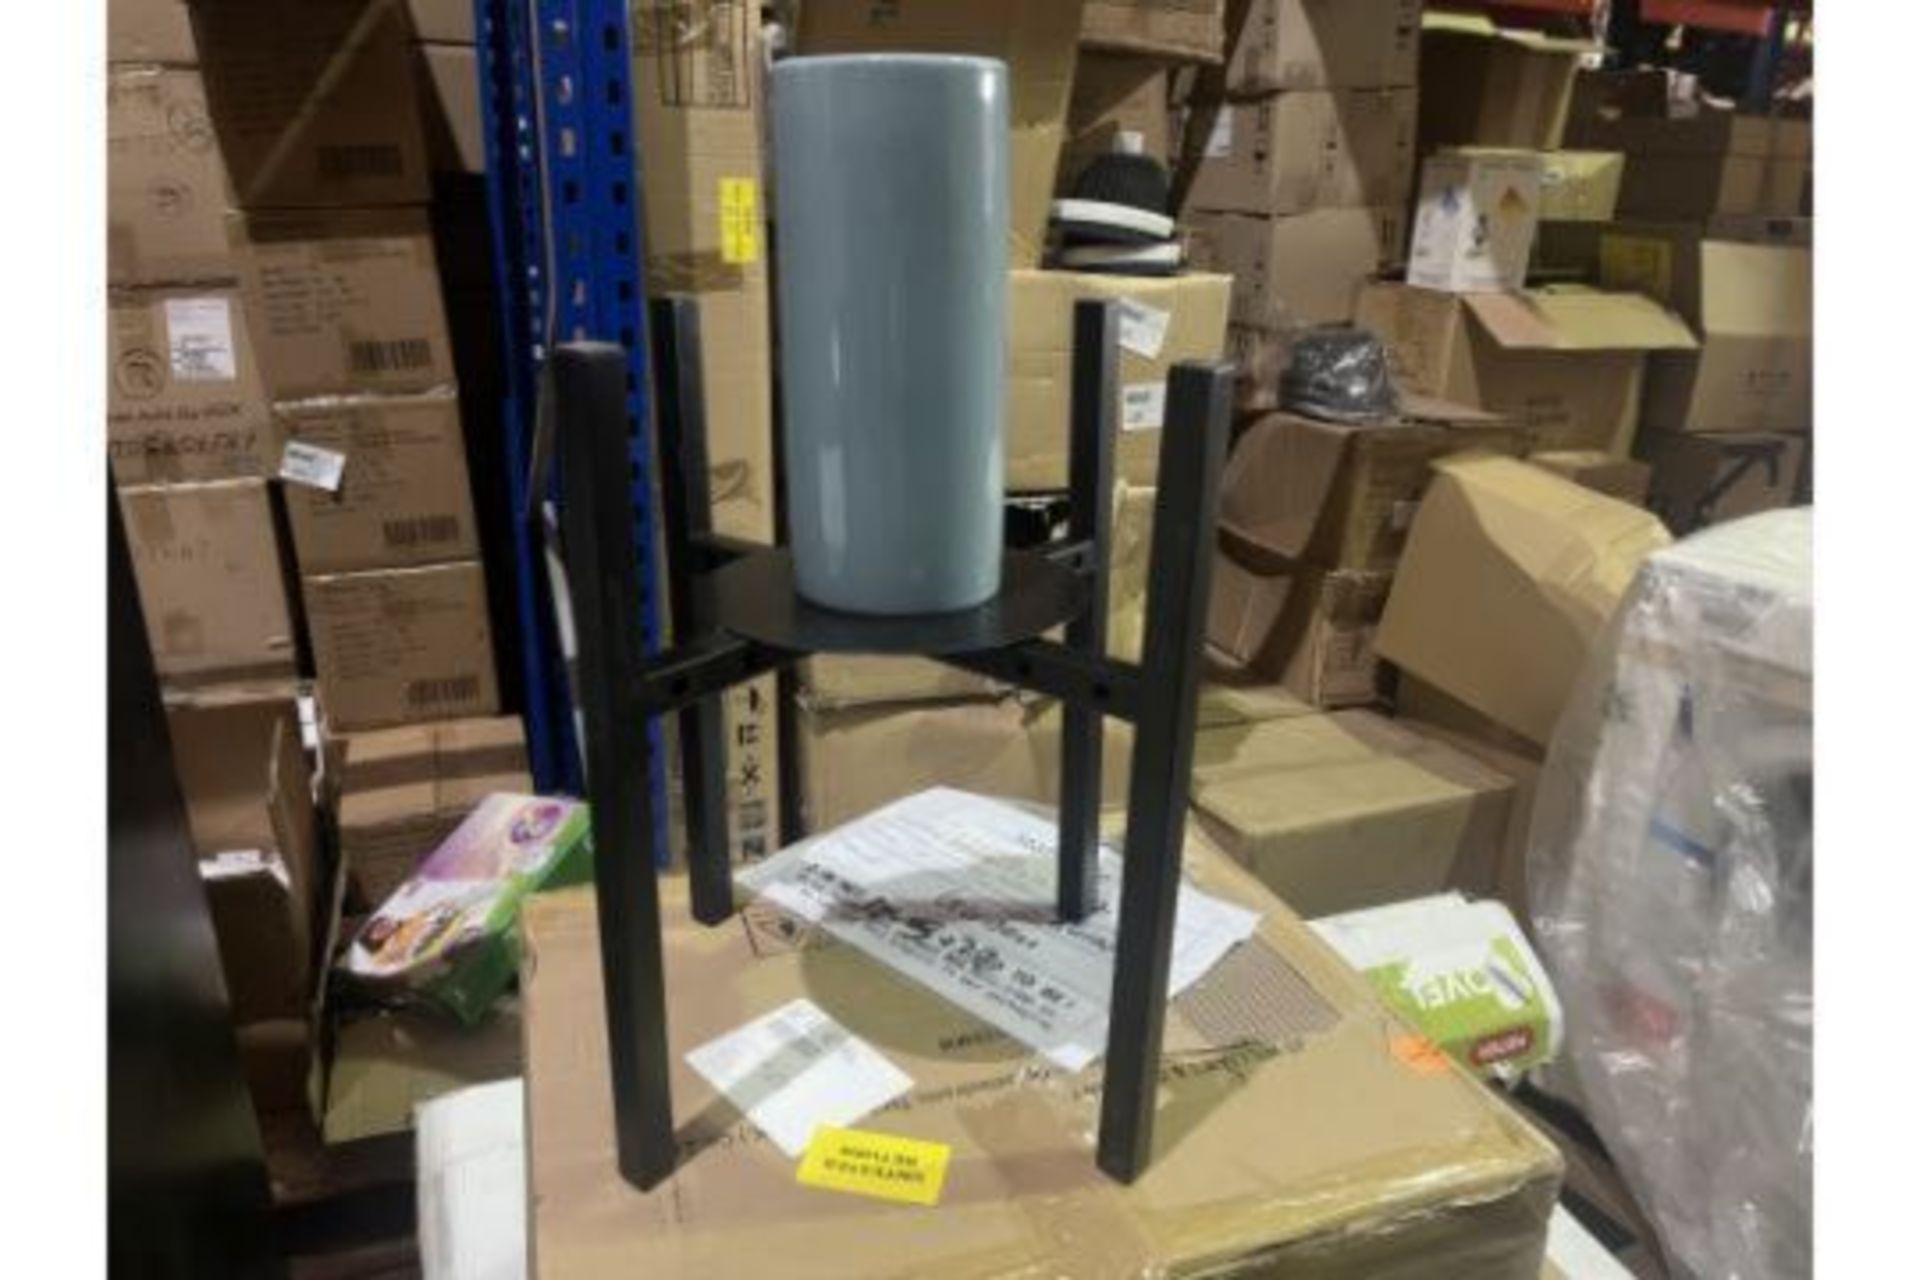 20 X BRAND NEW BLACK IRON VERTICAL FLOWER STANDS WITH TRAY, HOLDS 9-12 INCH DIAMETER FLOWER POTS AND